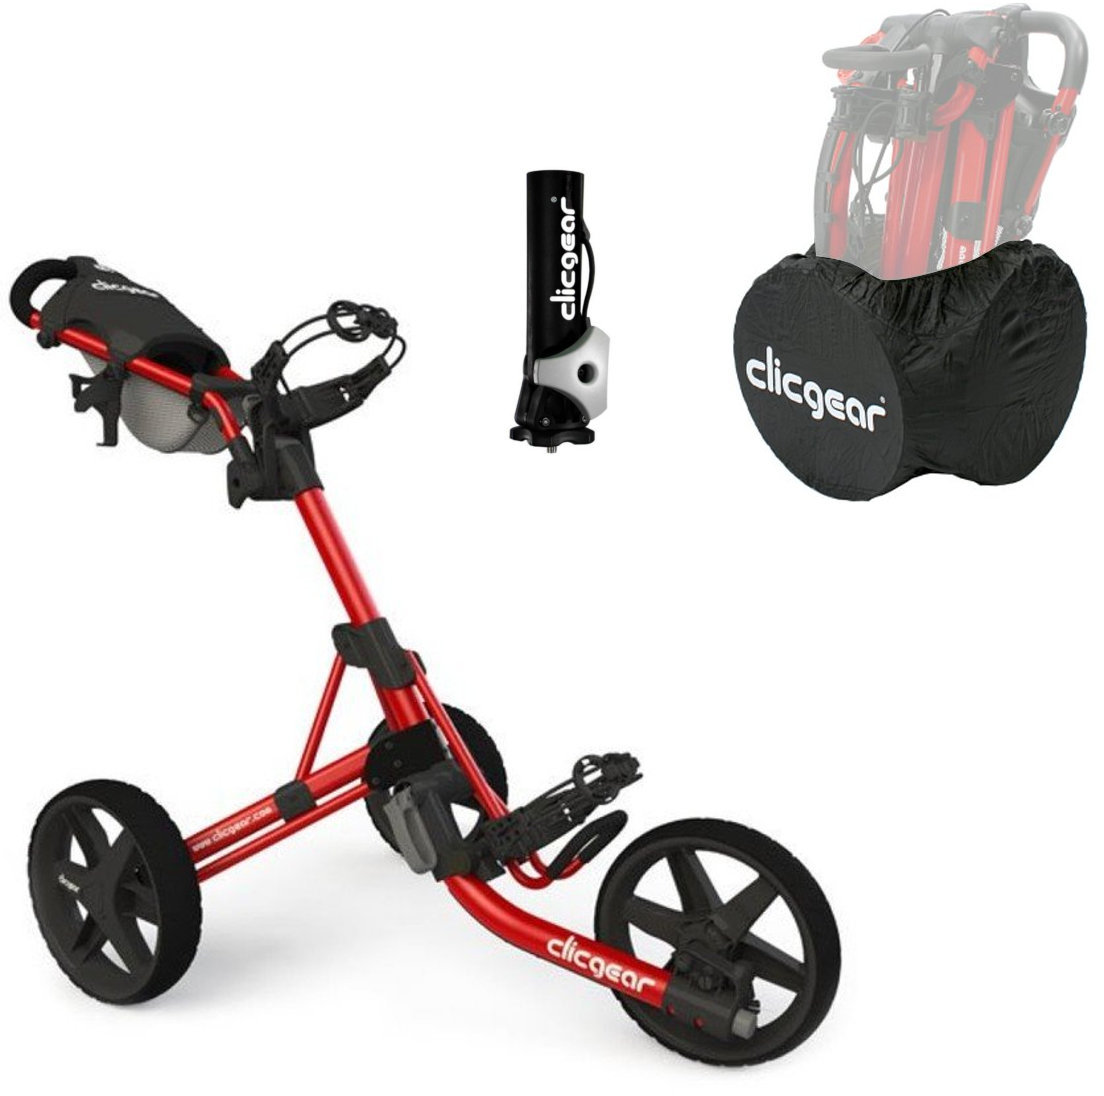 Manual Golf Trolley Clicgear 3.5+ Red/Black DELUXE SET Manual Golf Trolley